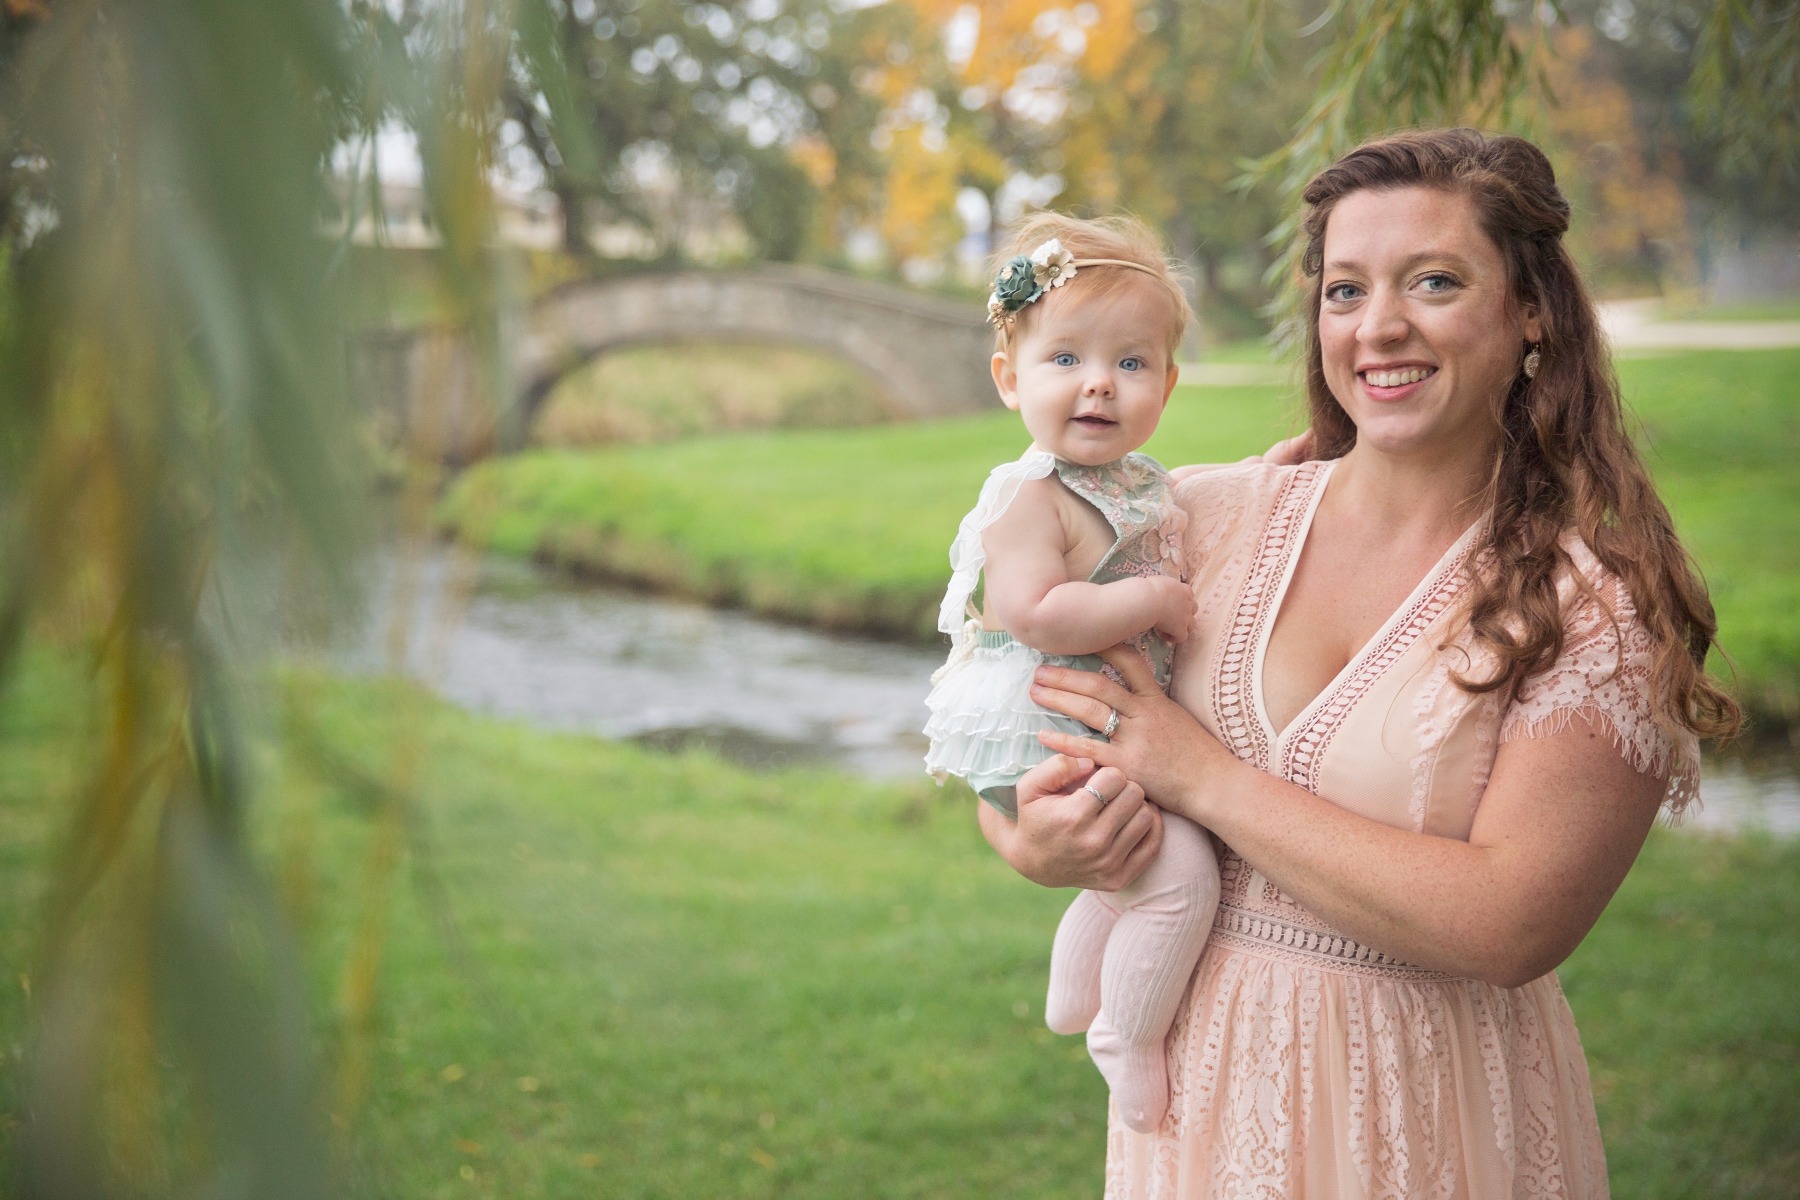 mom in pink dress poses with little girl beneath a willow tree